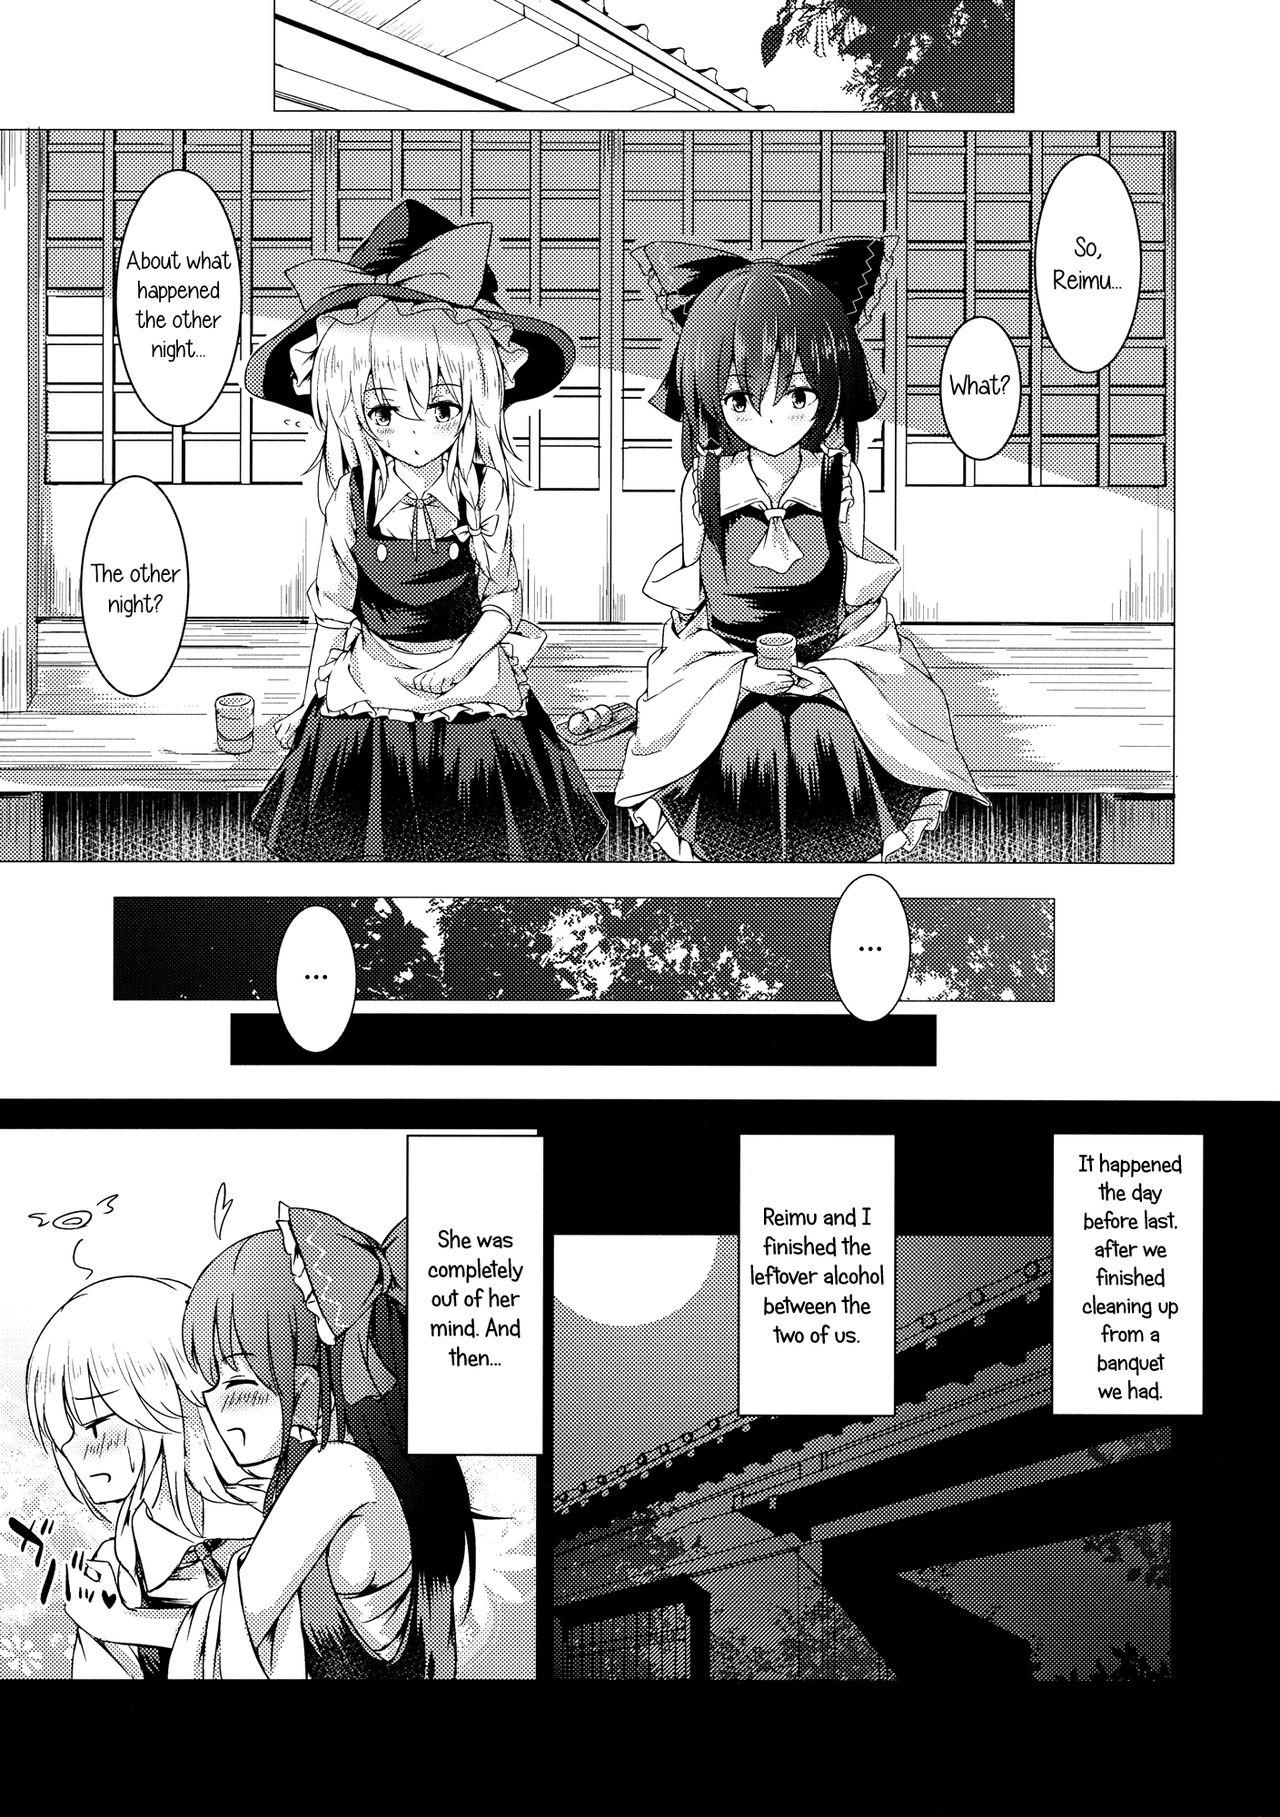 Pool ever since - Touhou project Large - Page 4